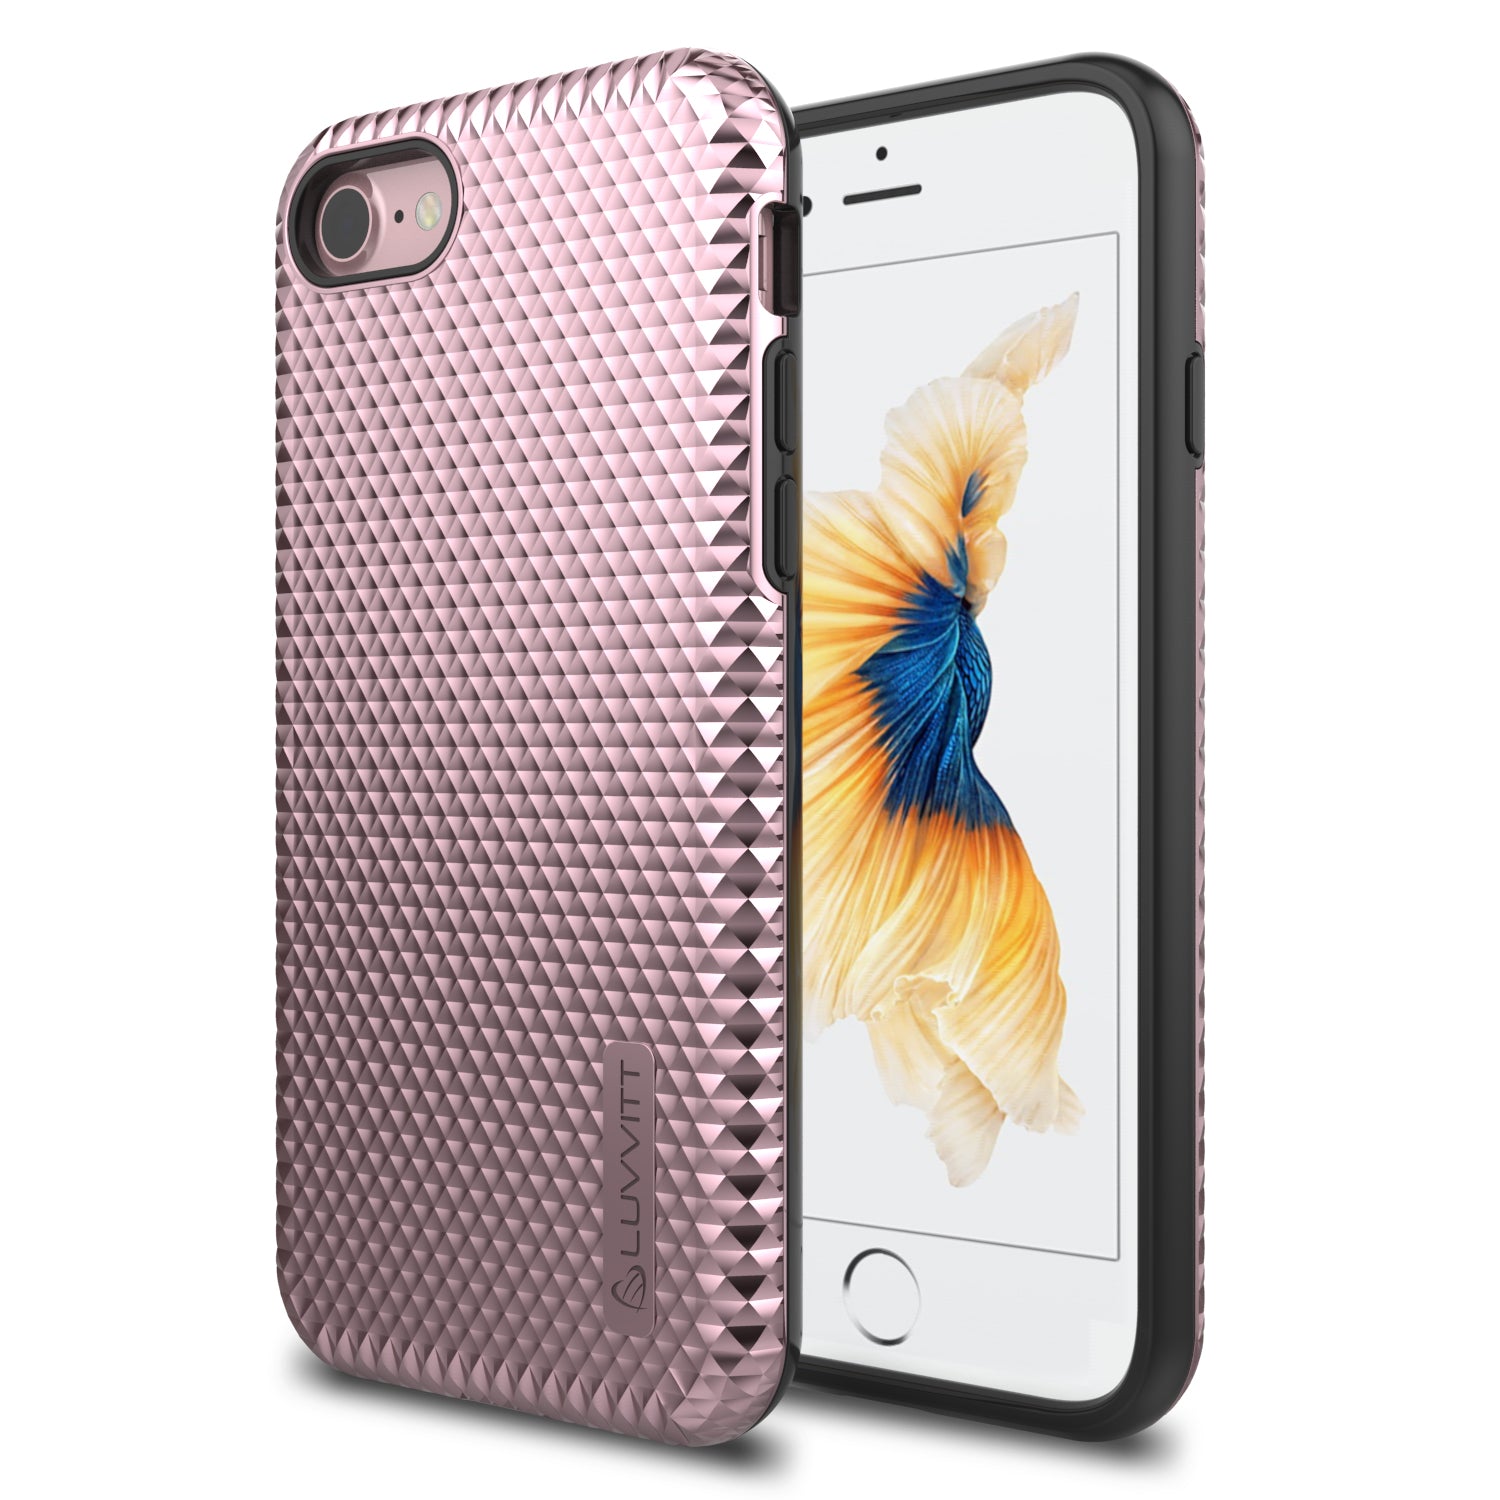 Luvvitt Brilliant Armor Fashion Case for iPhone SE 2020 / iPhone 7 / iPhone 8 - Rose Gold